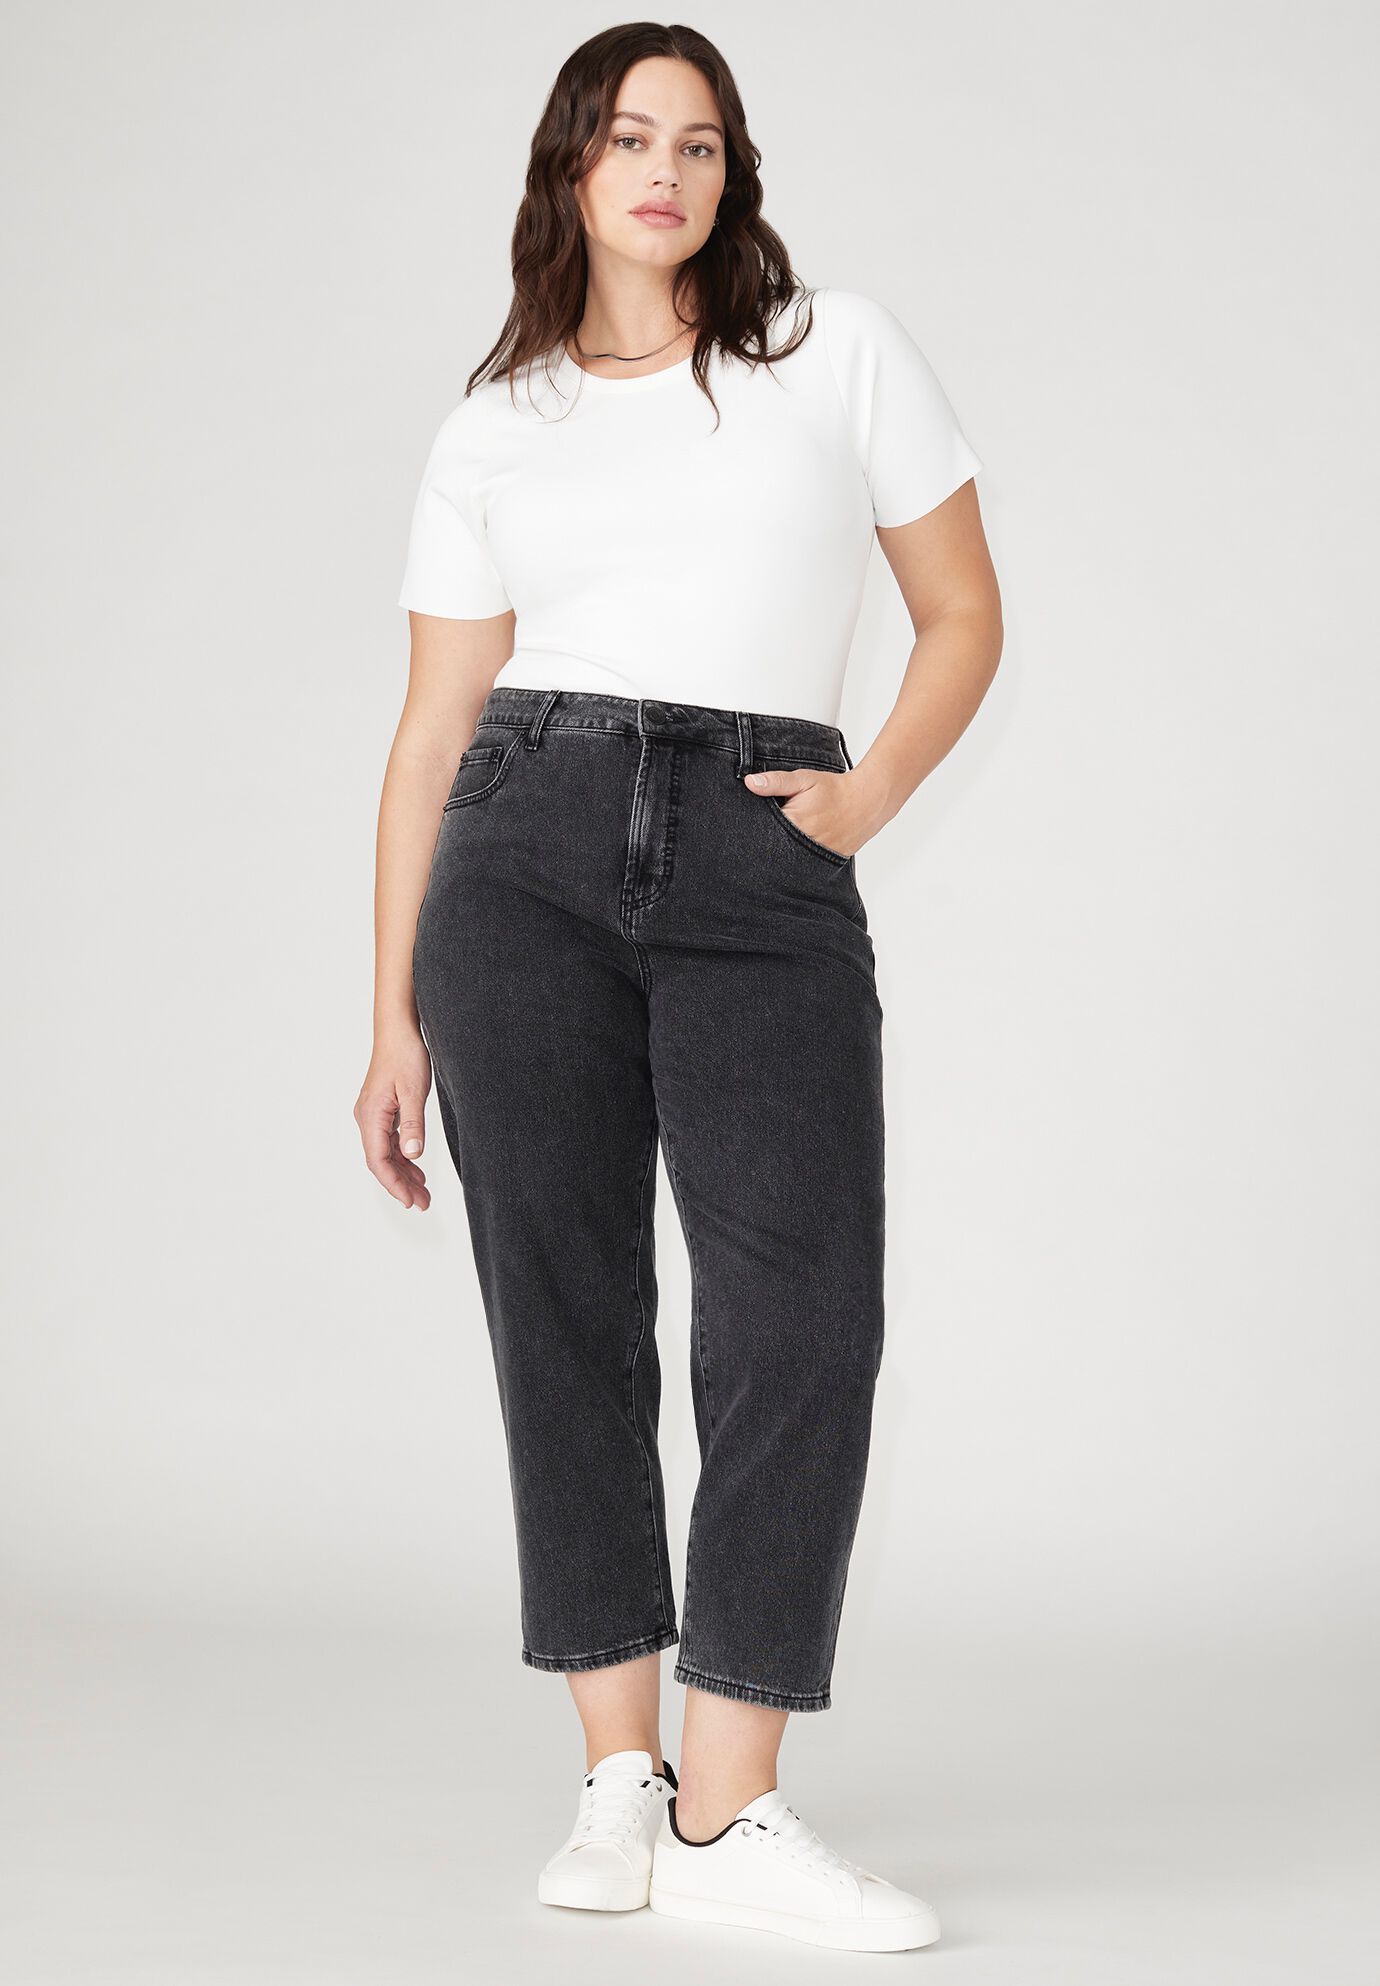 Plus Size Women The Naomi Comfort Stretch Straight Jean Crop By ( Size 28 )